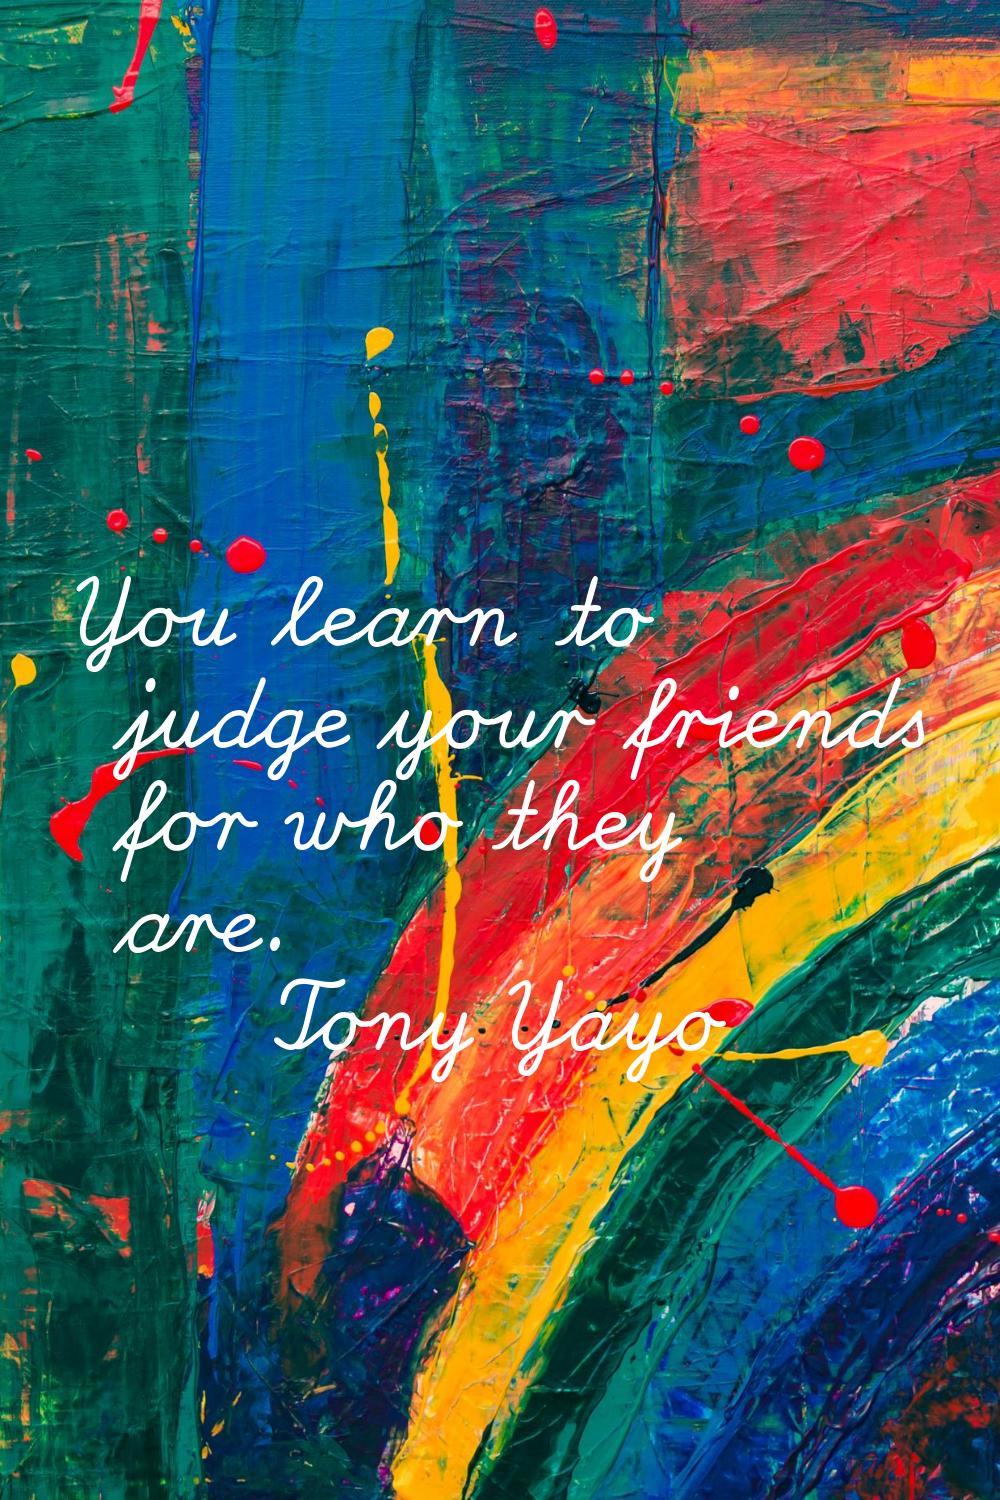 You learn to judge your friends for who they are.